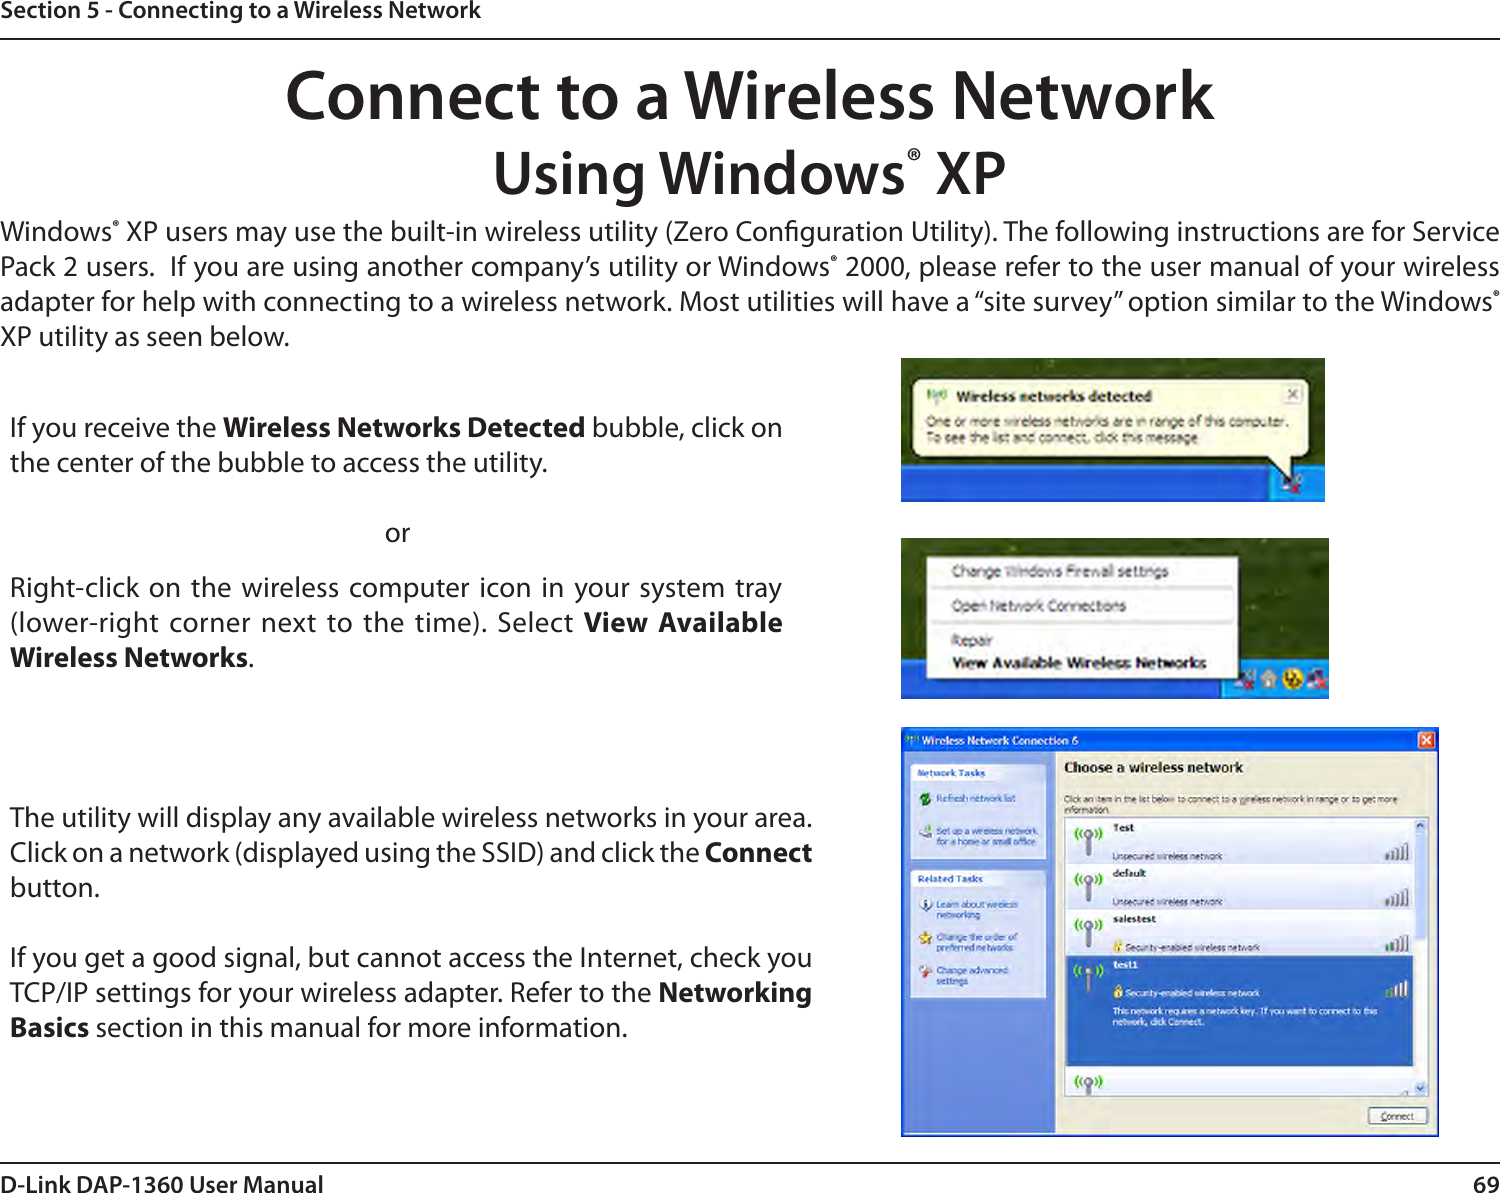 69D-Link DAP-1360 User ManualSection 5 - Connecting to a Wireless NetworkConnect to a Wireless NetworkUsing Windows® XPWindows® XP users may use the built-in wireless utility (Zero Conguration Utility). The following instructions are for Service Pack 2 users.  If you are using another company’s utility or Windows® 2000, please refer to the user manual of your wireless adapter for help with connecting to a wireless network. Most utilities will have a “site survey” option similar to the Windows® XP utility as seen below.Right-click on the wireless computer icon in your system tray (lower-right corner next to the time). Select View Available Wireless Networks.If you receive the Wireless Networks Detected bubble, click on the center of the bubble to access the utility.     orThe utility will display any available wireless networks in your area. Click on a network (displayed using the SSID) and click the Connect button.If you get a good signal, but cannot access the Internet, check you TCP/IP settings for your wireless adapter. Refer to the Networking Basics section in this manual for more information.